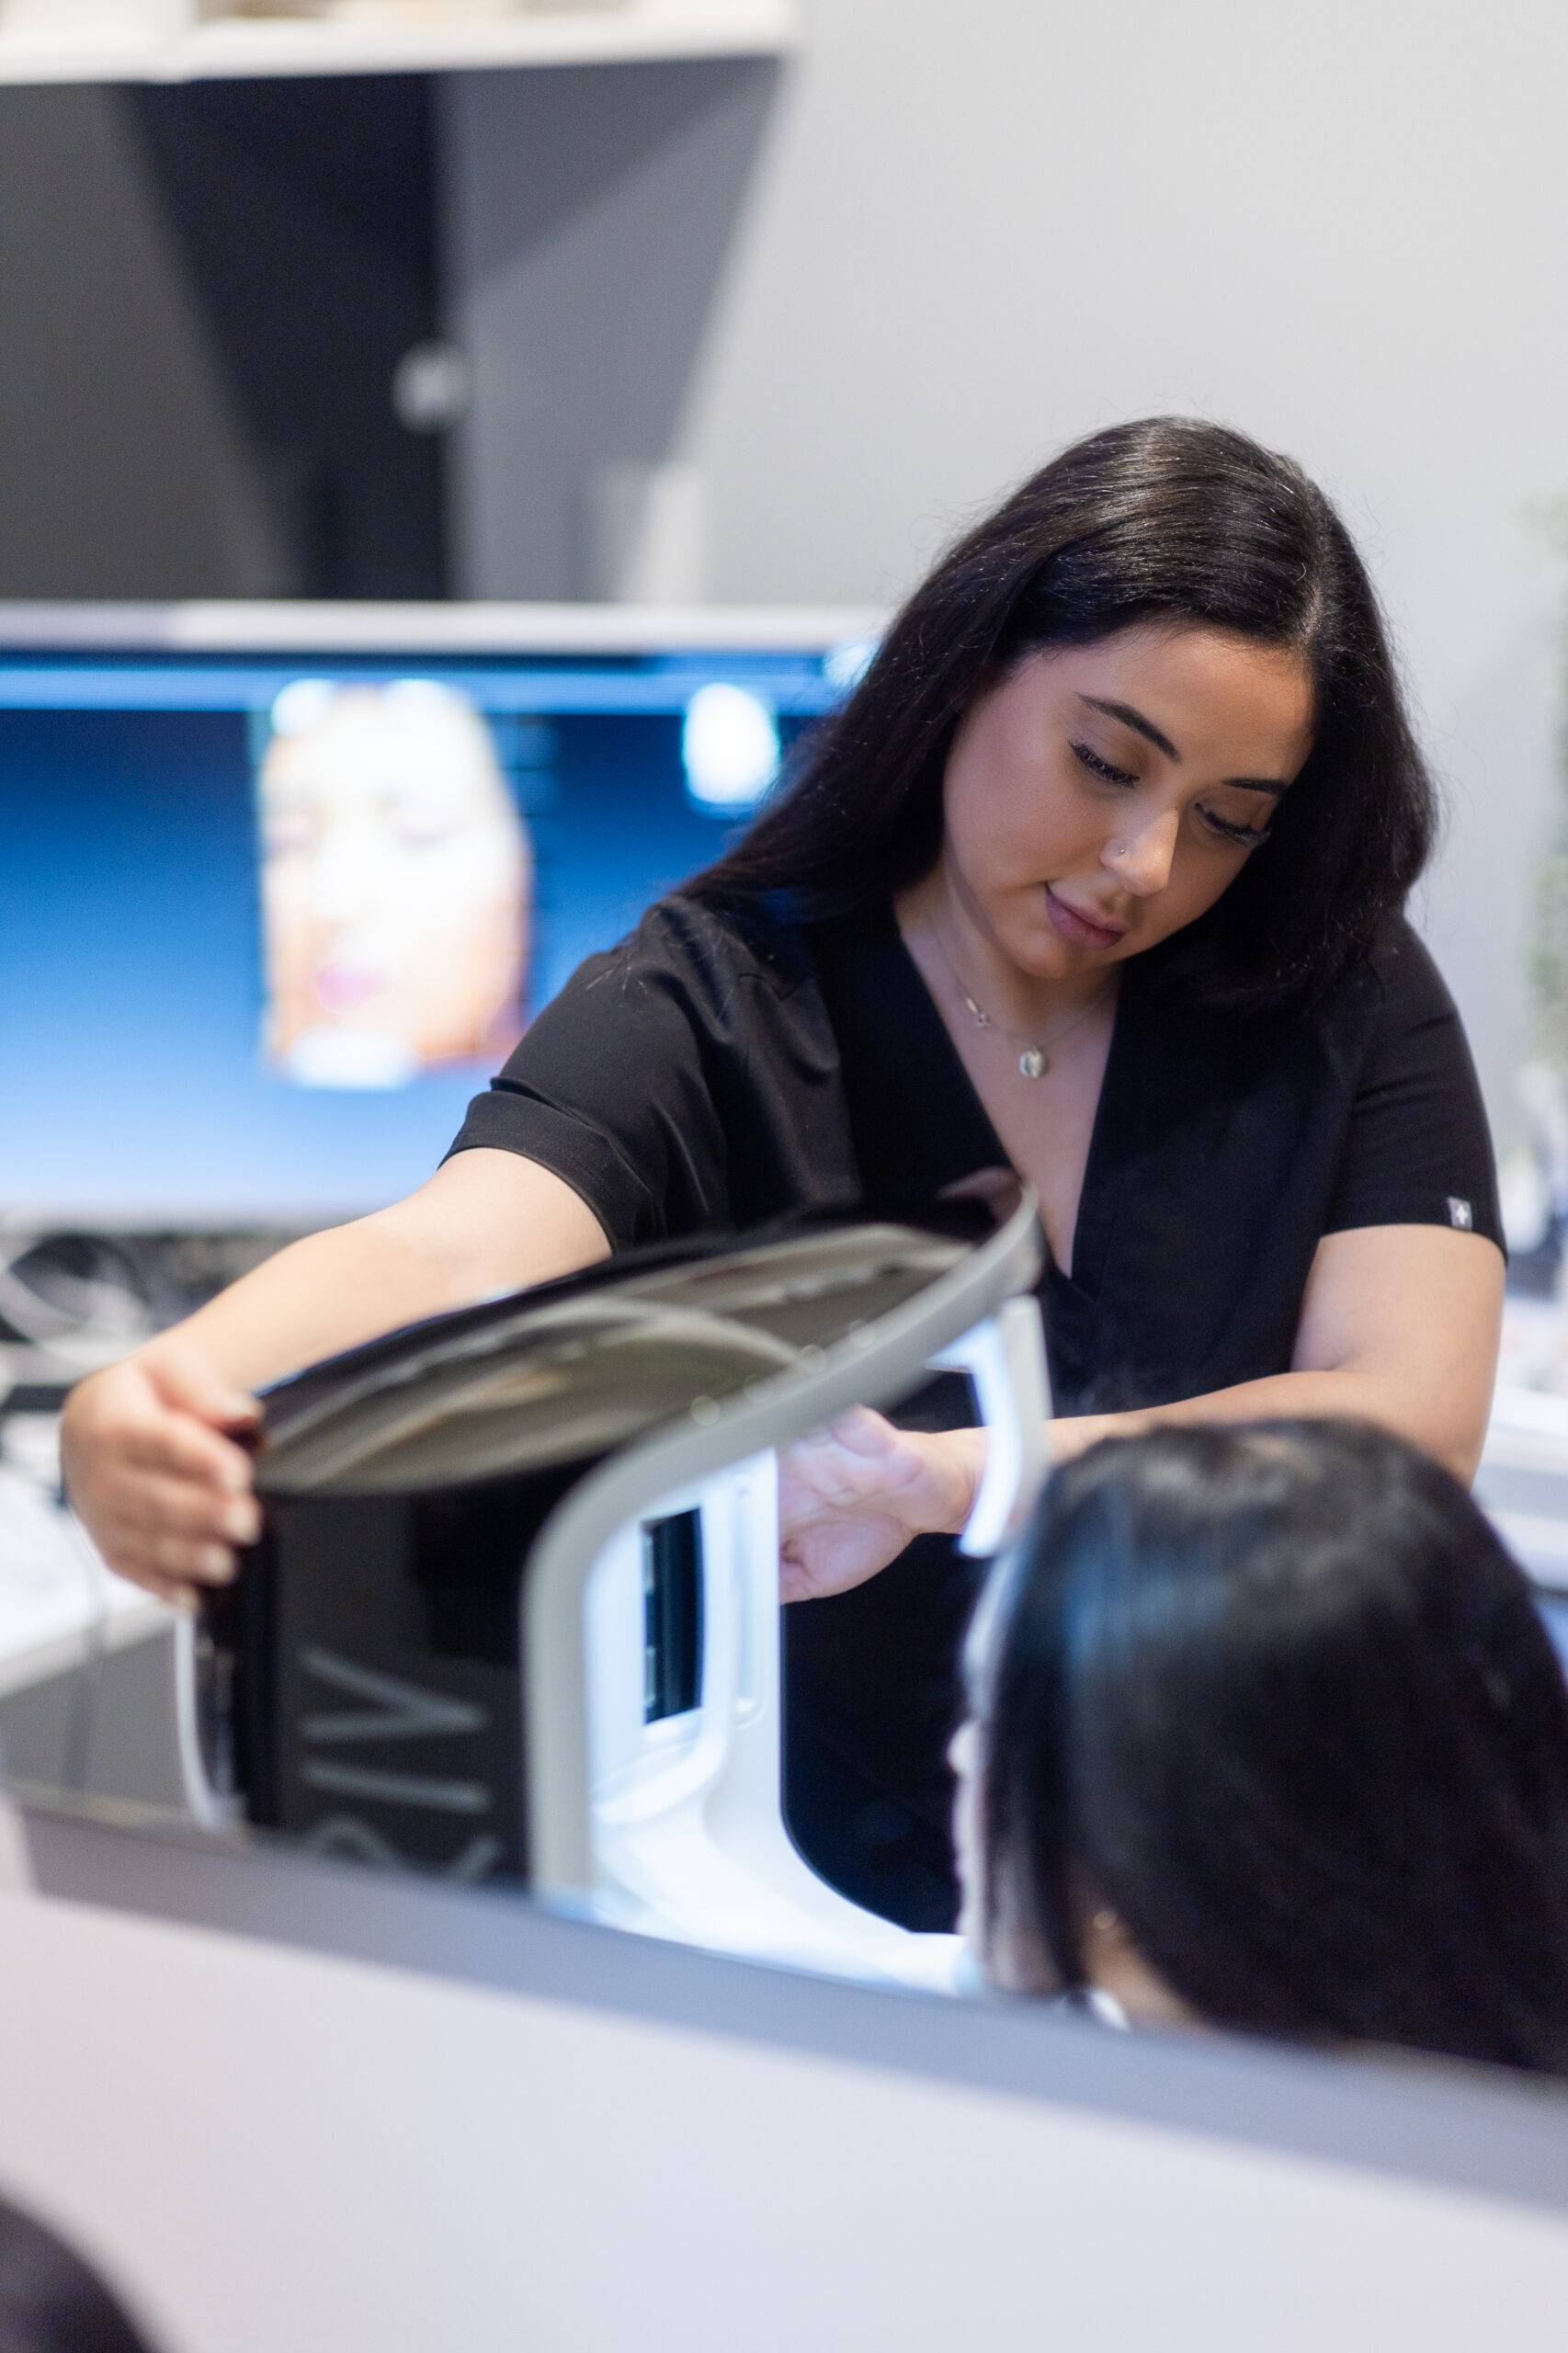 A woman with dark hair examines her reflection in a high-tech Visia mirror, adjusting equipment on a modern desktop, possibly in a beauty salon or medical clinic.